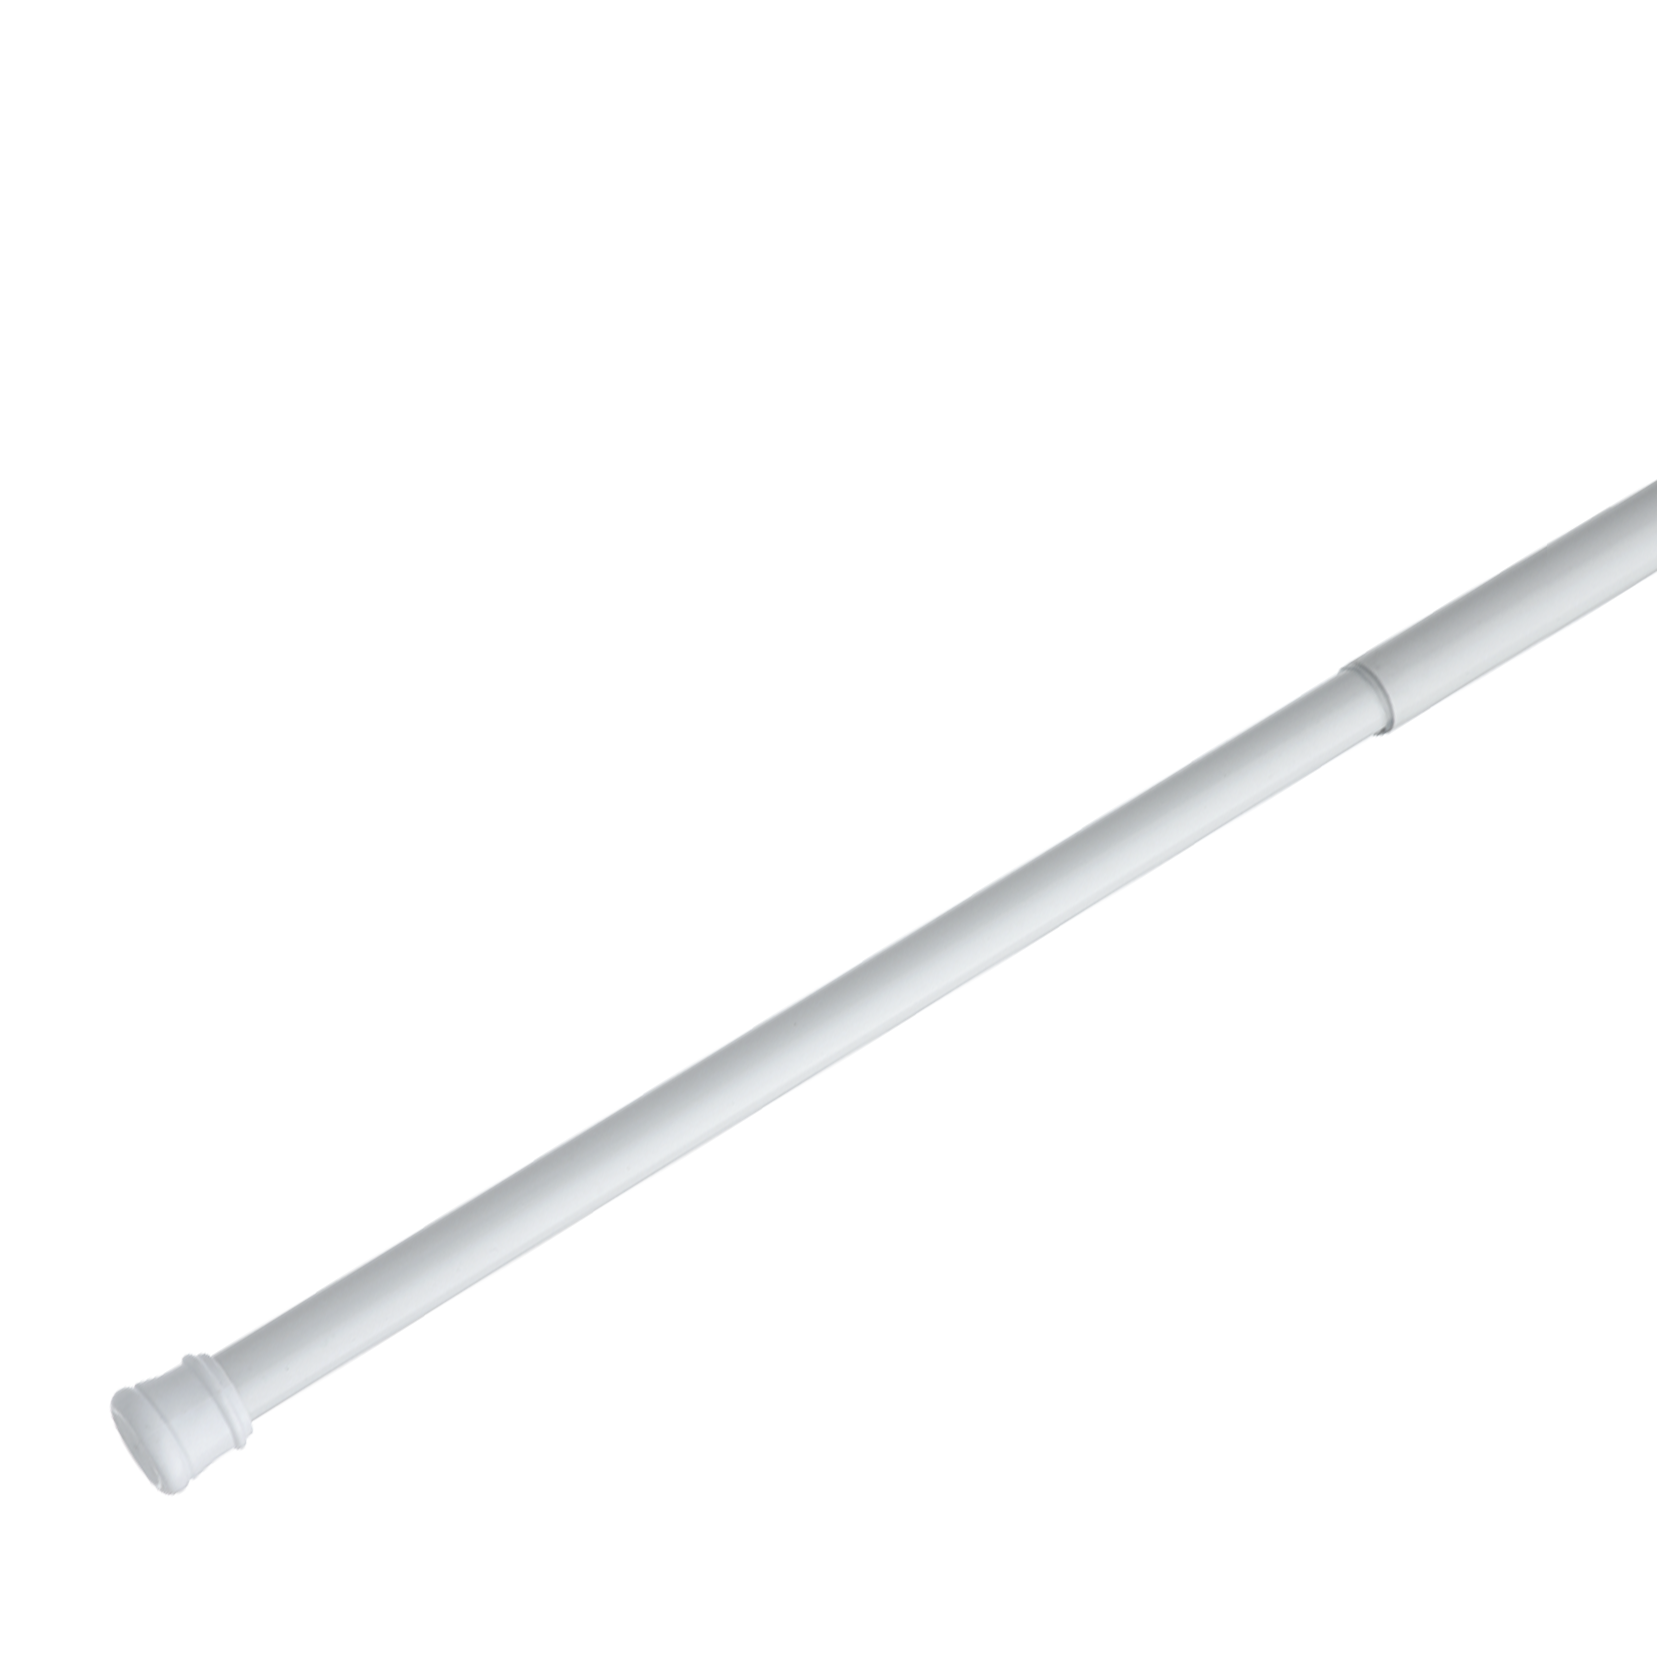 Shower Rods - Extendable Tension Shower Rod - Extendable Tension Shower Rod - White